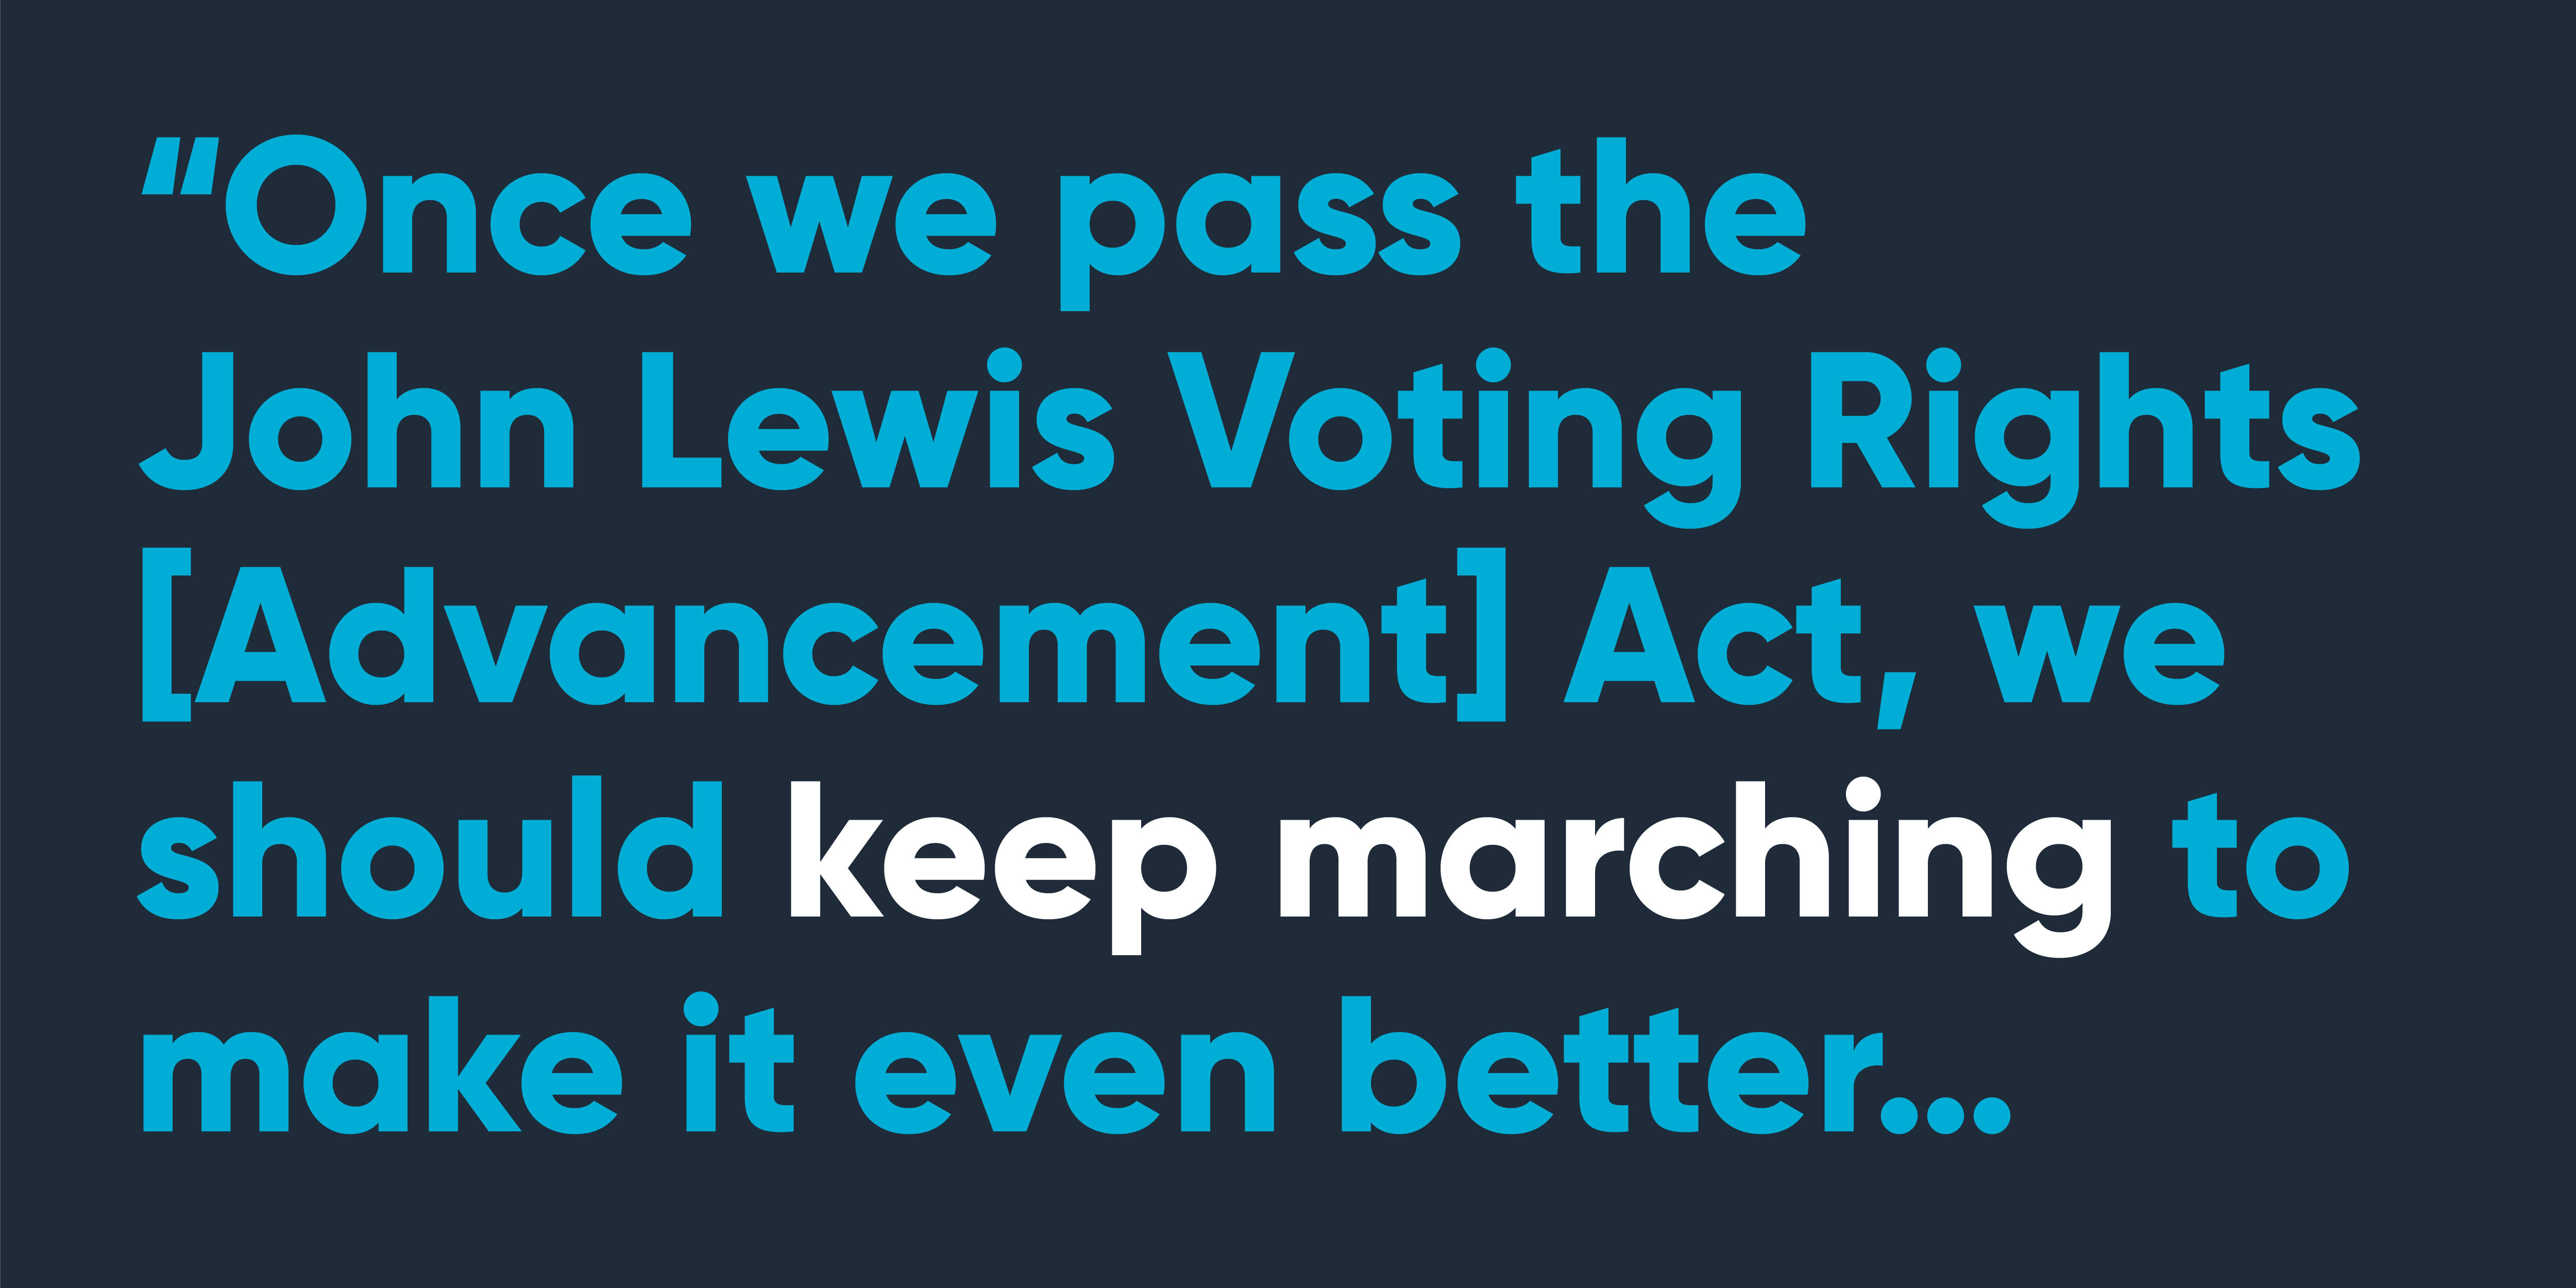 “Once we pass the John Lewis Voting Rights [Advancement] Act, we should keep marching to make it even better…